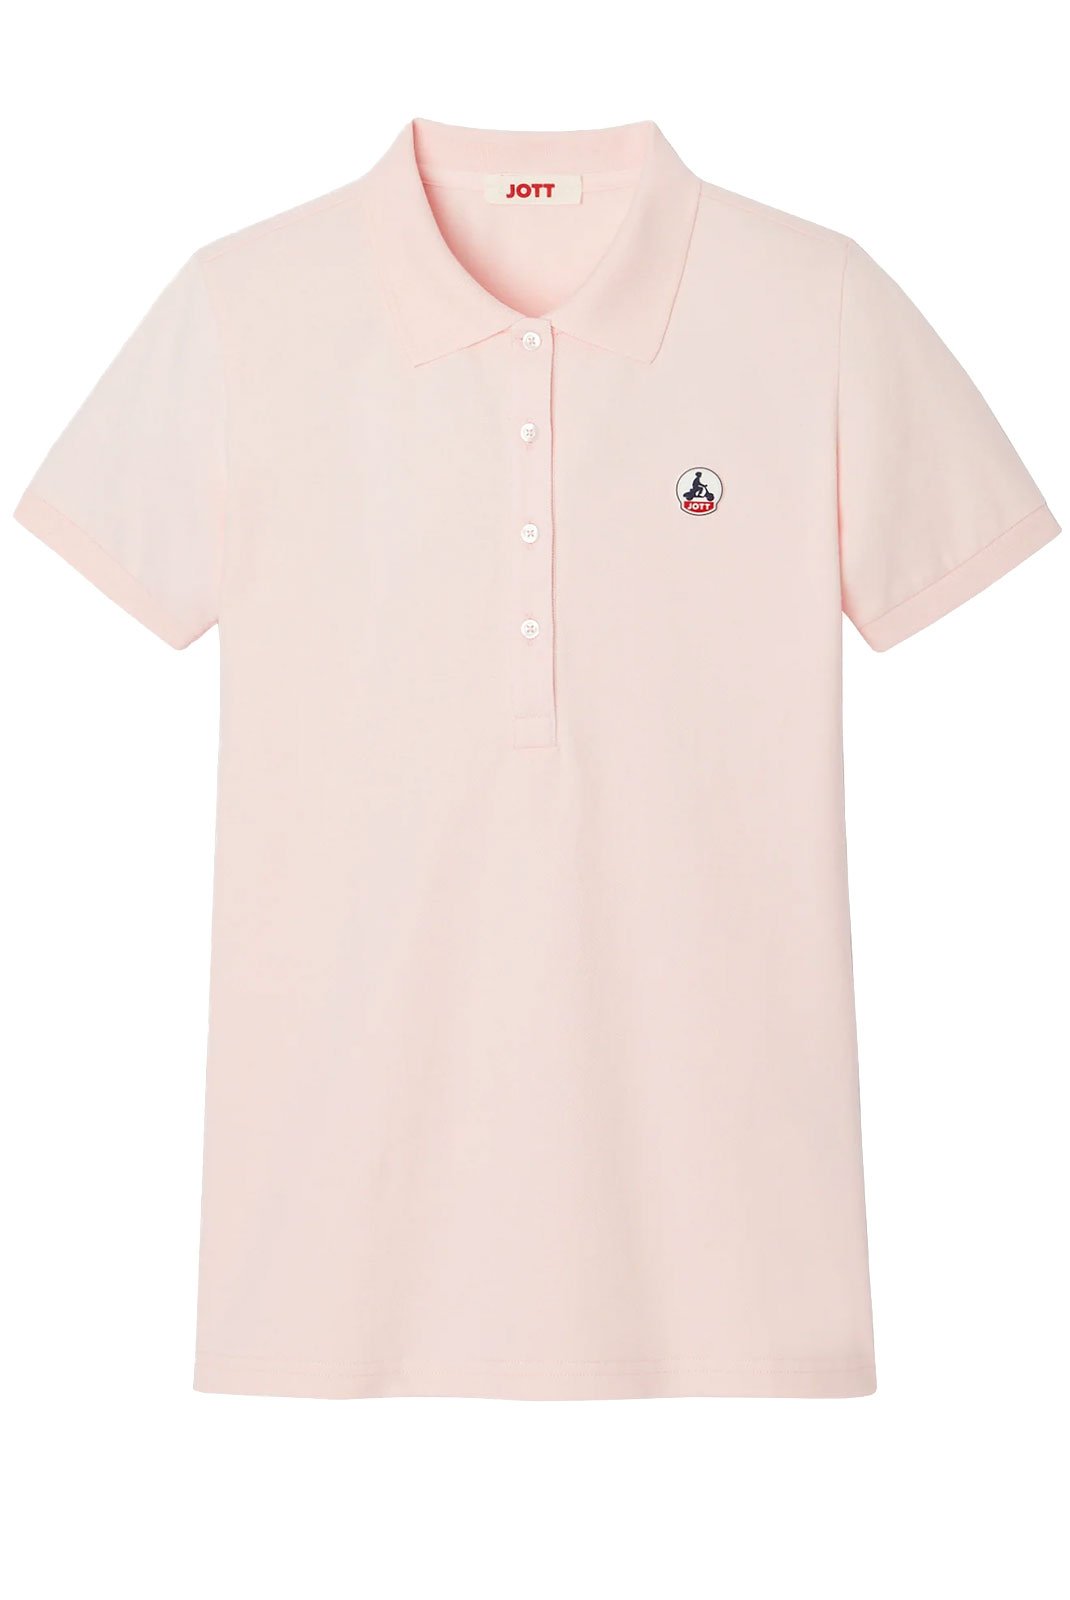 Tops & Tee shirts  Just over the top FRANCA 463 SOFT PINK